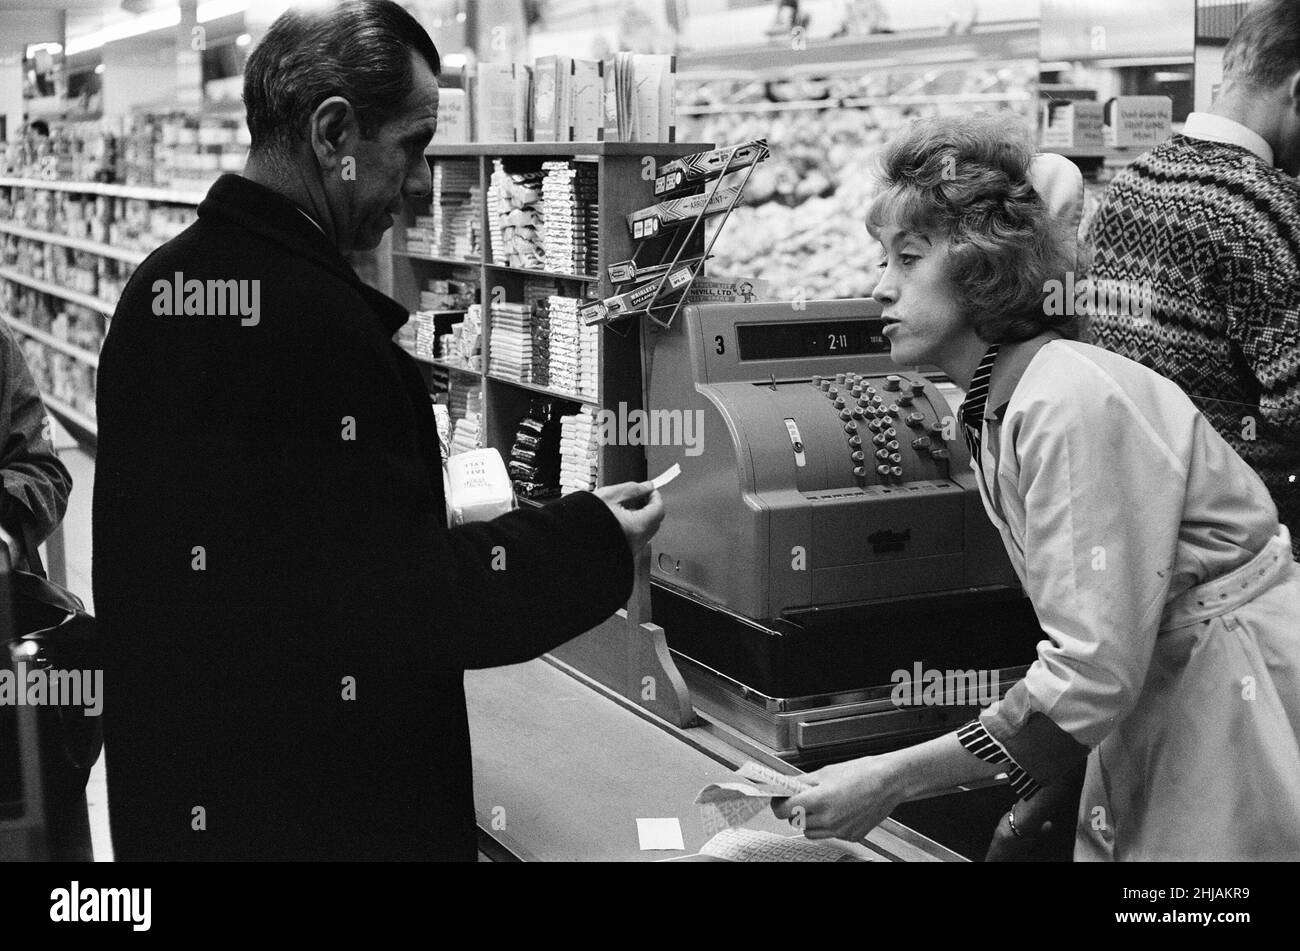 Shoppers, Fine Fare Supermarket, Wilton, London, 29th October 1963. Collect Green Shield Stamps at till after paying for goods. Green Shield Stamps is a British sales promotion scheme that rewards shoppers with stamps that could be redeemed, and used to buy gifts from a catalogue or from any affiliated retailer. Stock Photo